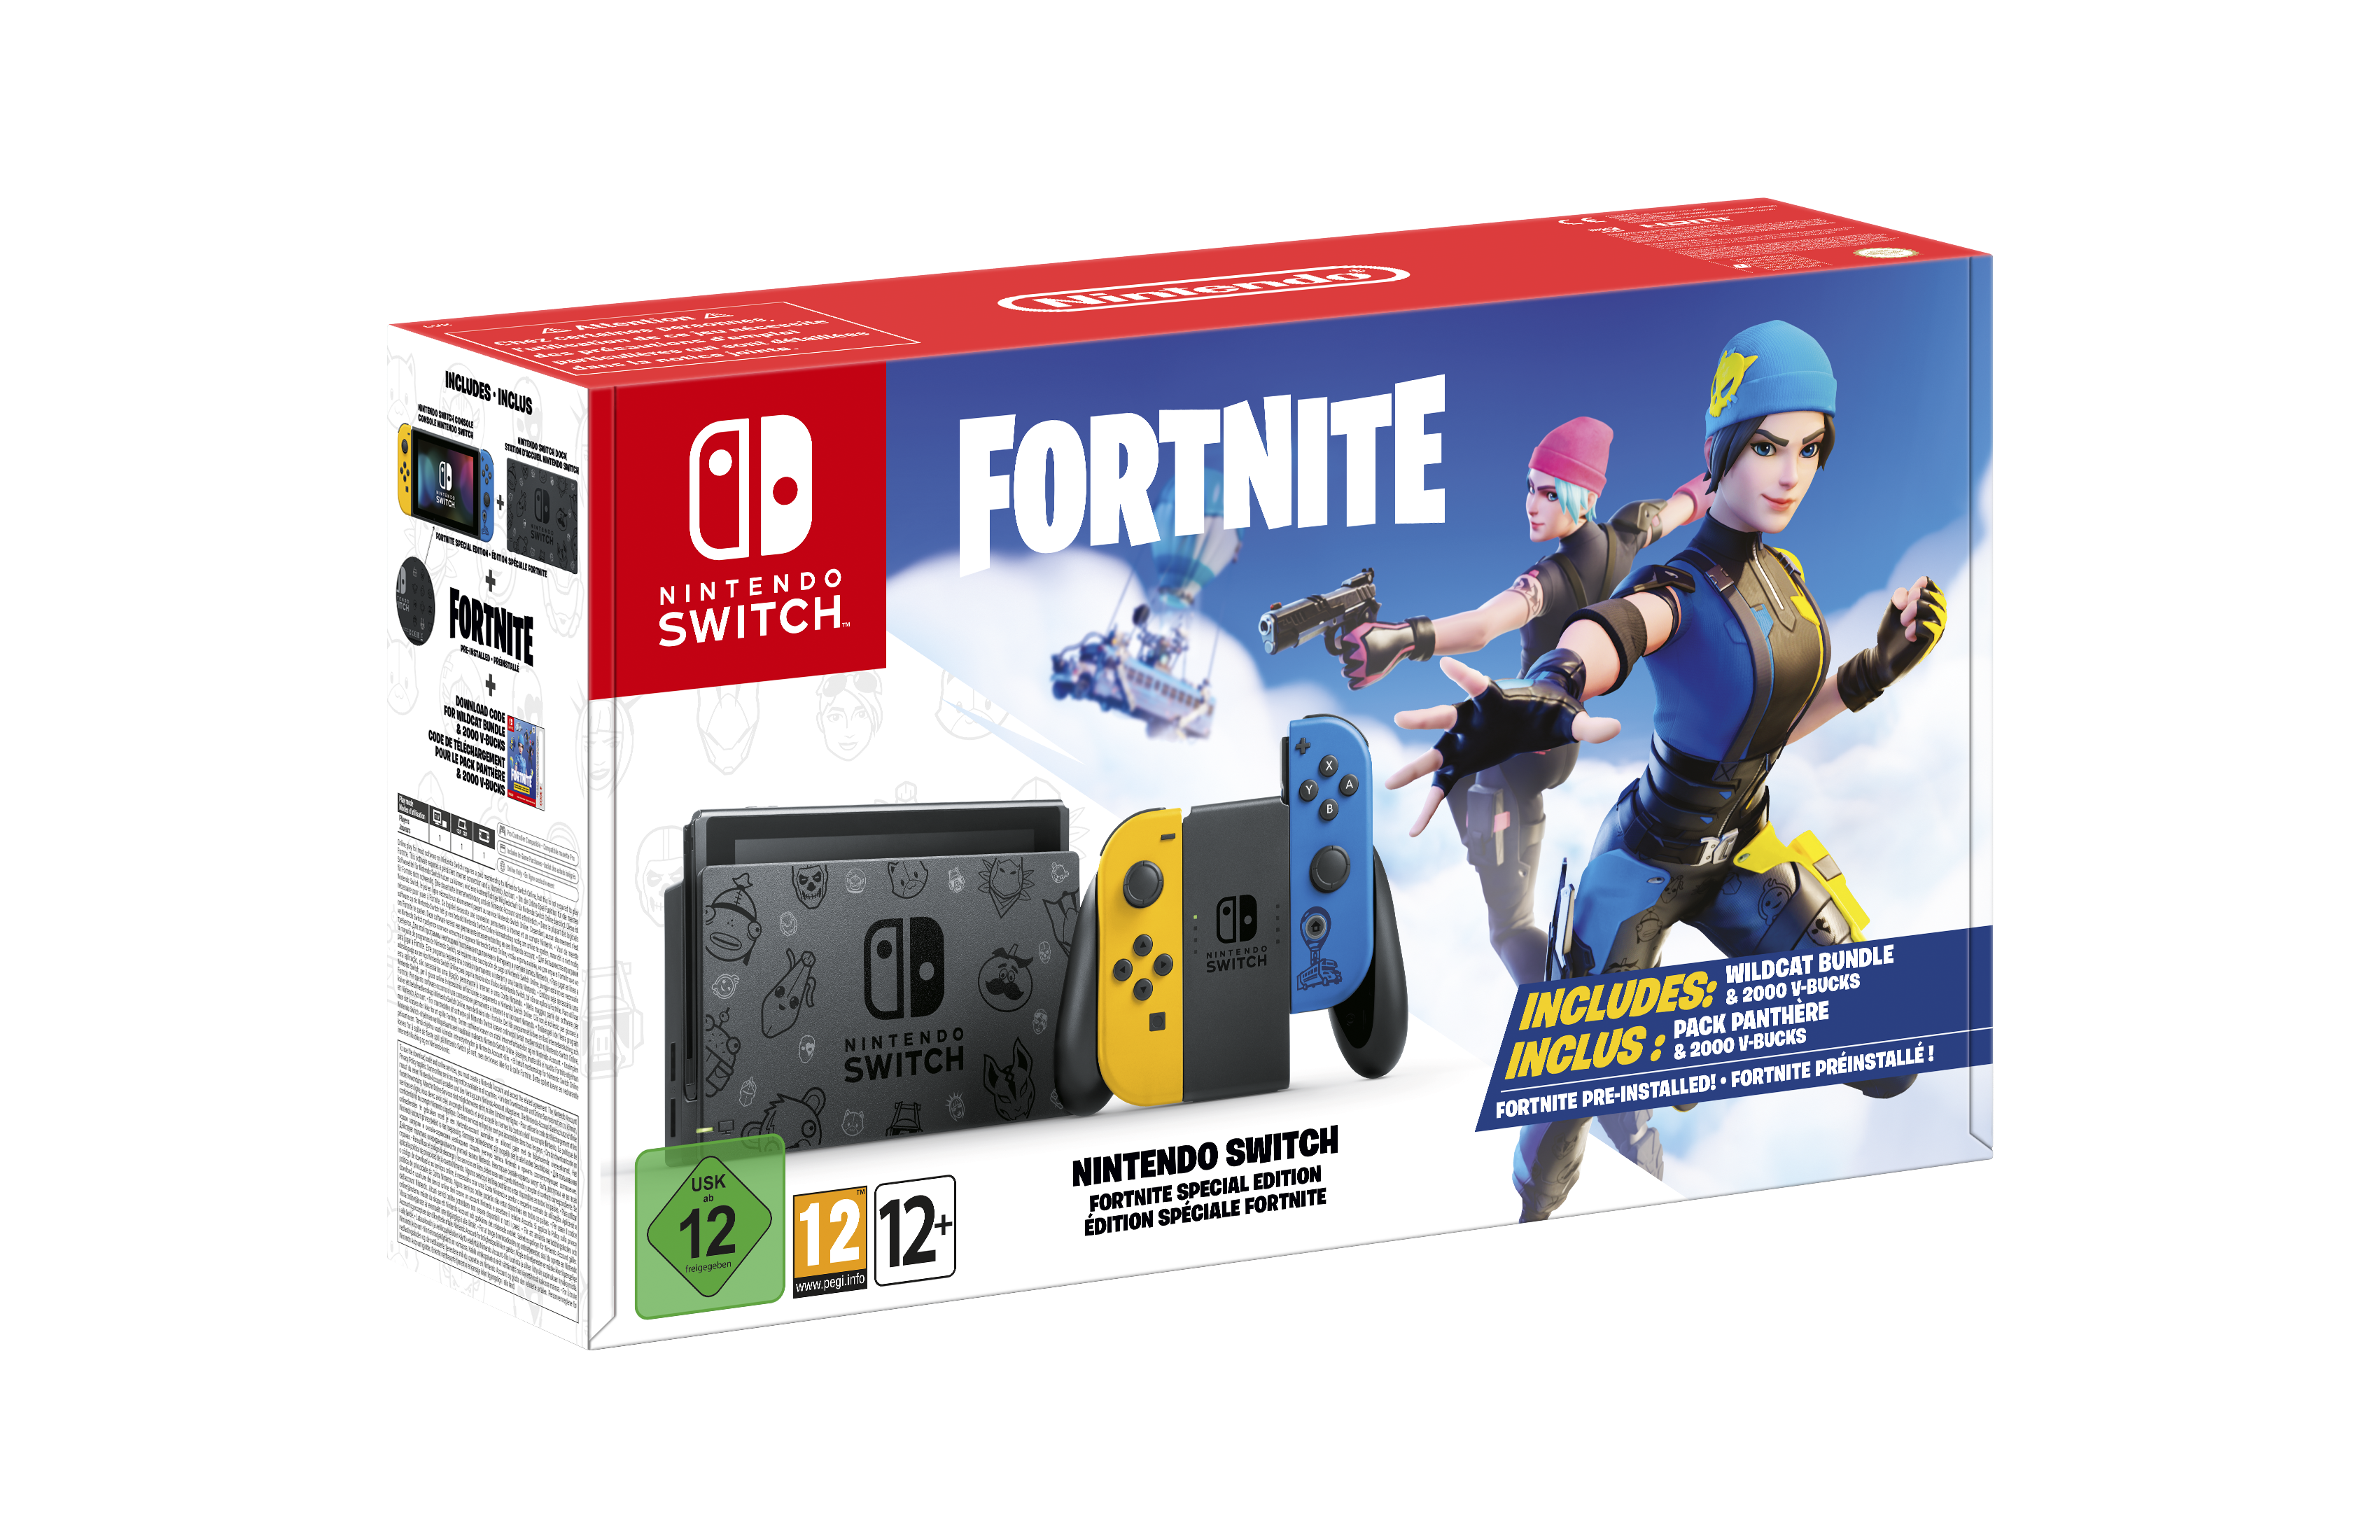 Fortnite is getting its own unique Nintendo Switch hardware